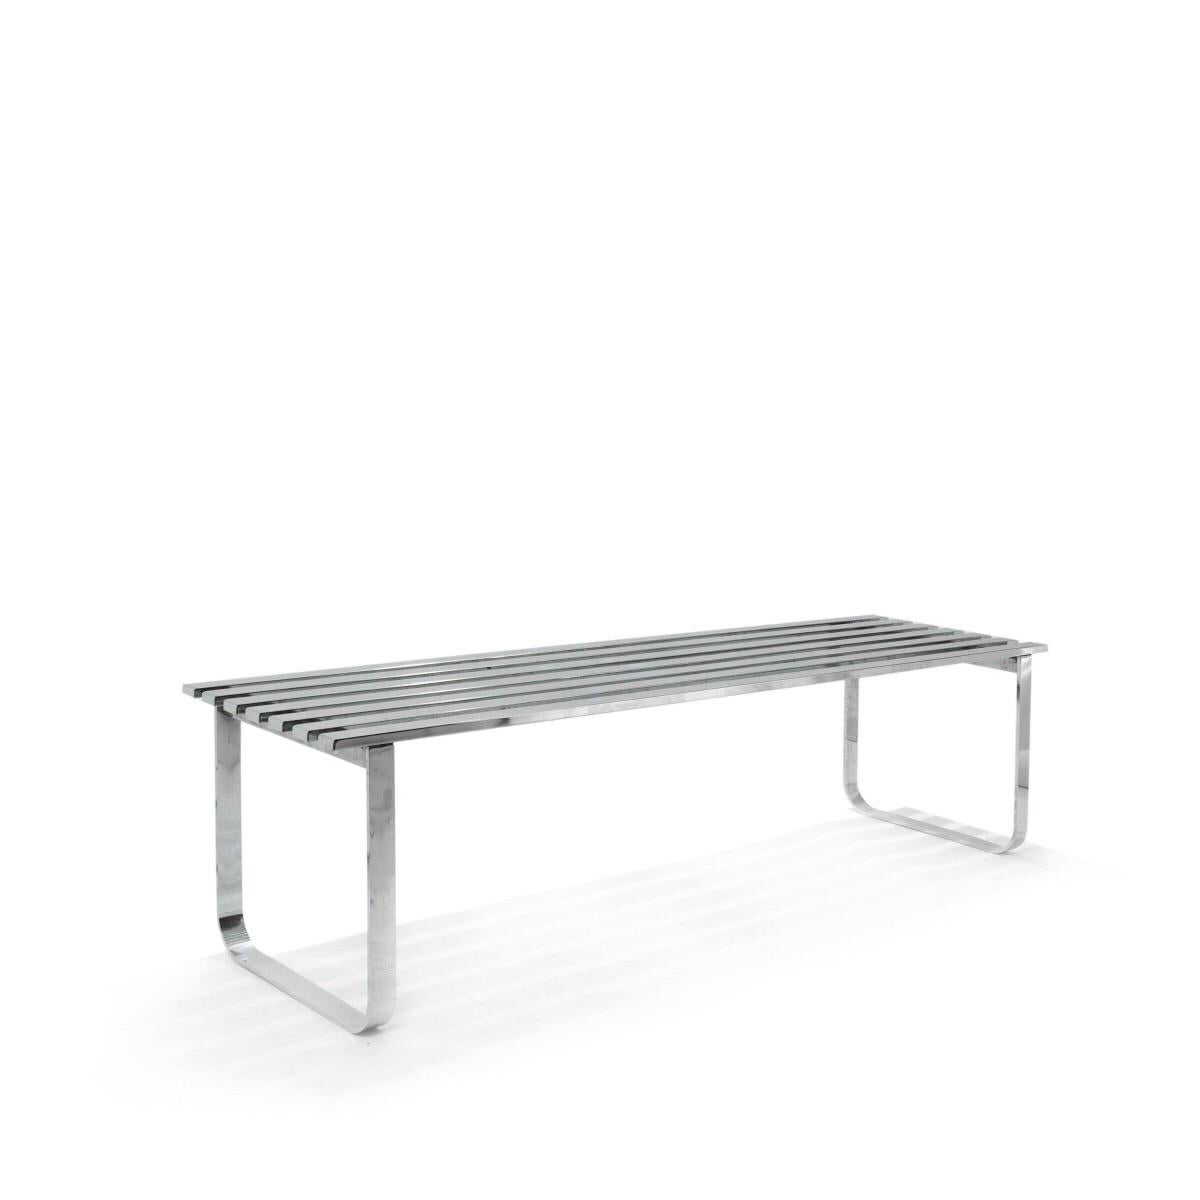 A polished chrome bench with slatted top and curved legs by DIA (Design Institute of America. USA, circa 1970. Unsigned but widely documented.

Dimensions: 60 inches L x 16.5 inches D x 16.5 inches H.